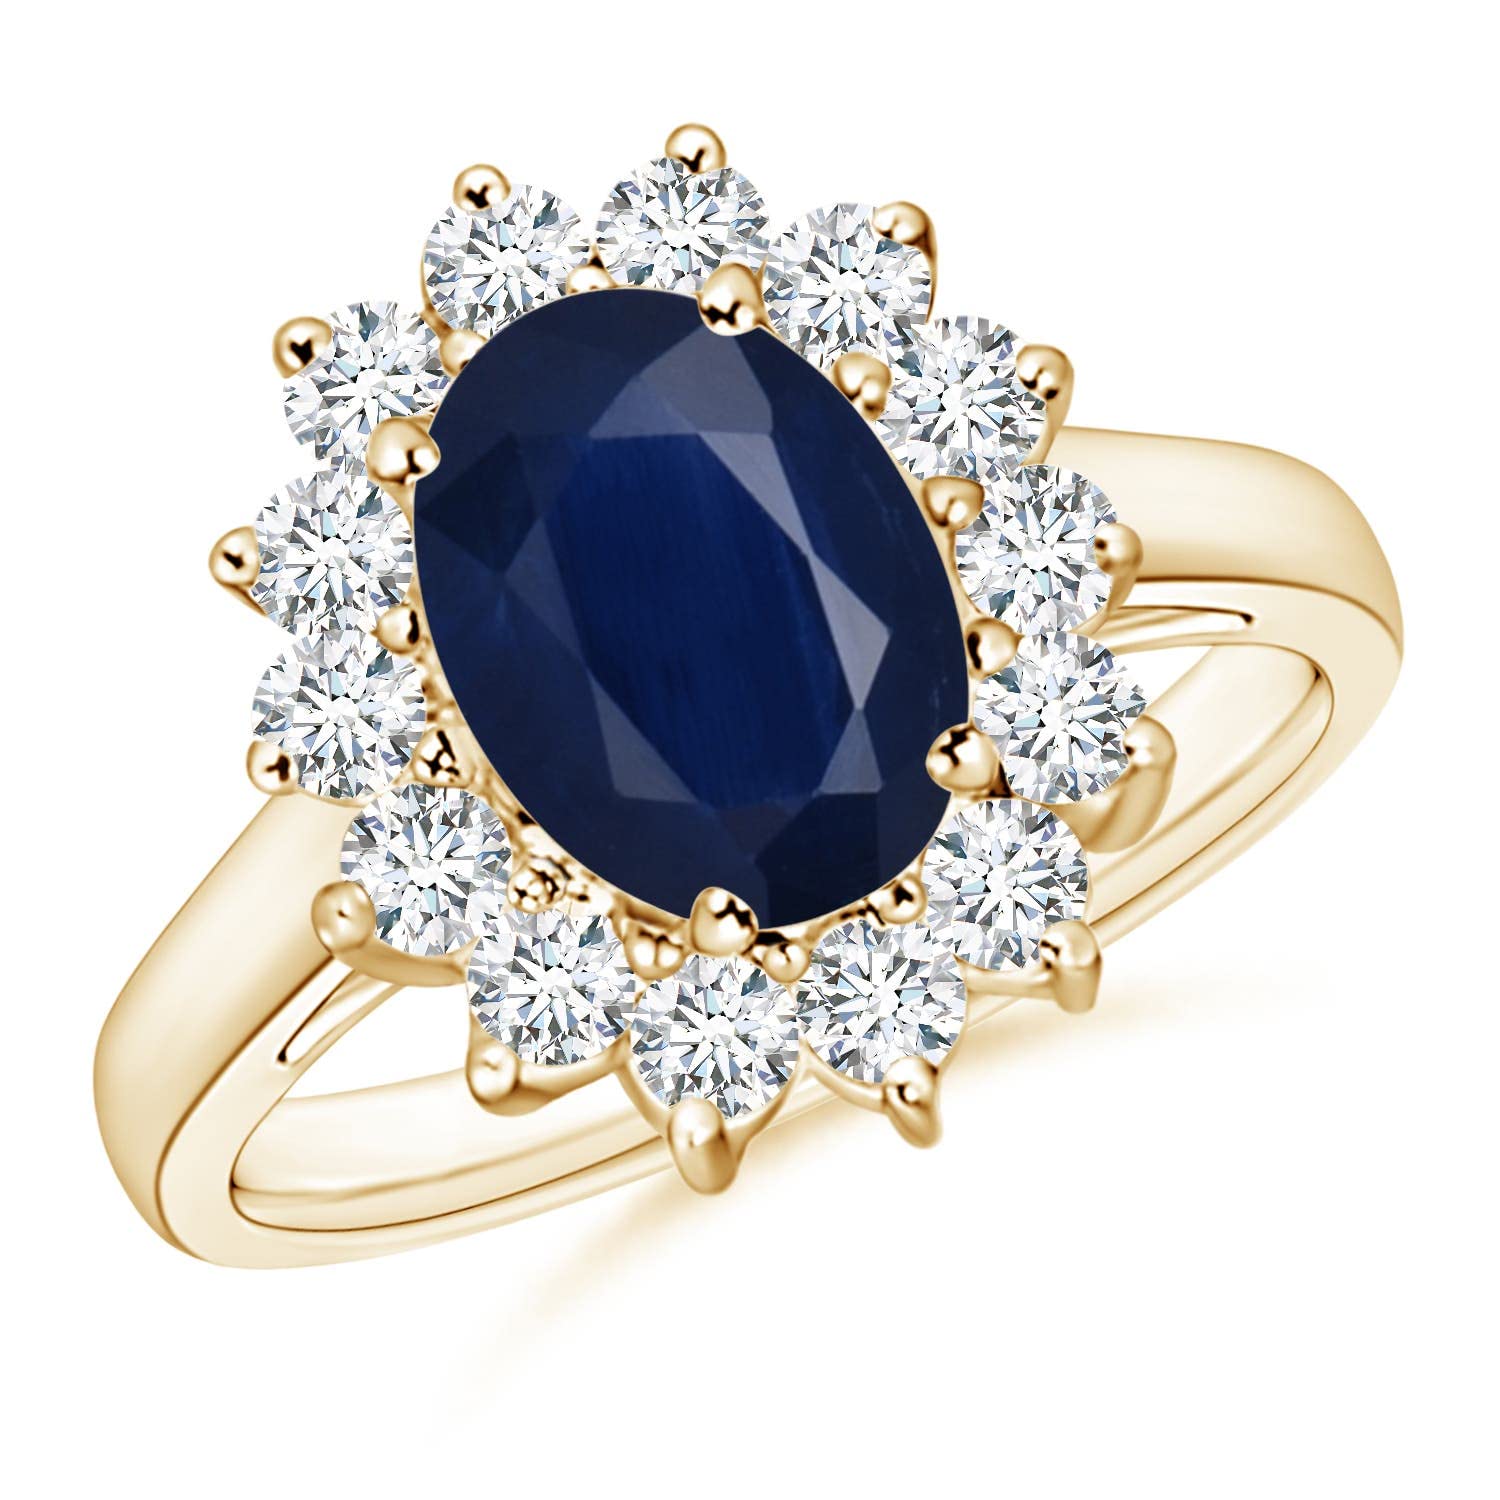 Angara Princess Diana Inspired Natural Blue Sapphire Ring with Diamond Halo (2 cttw Blue Sapphire) Size 3-13